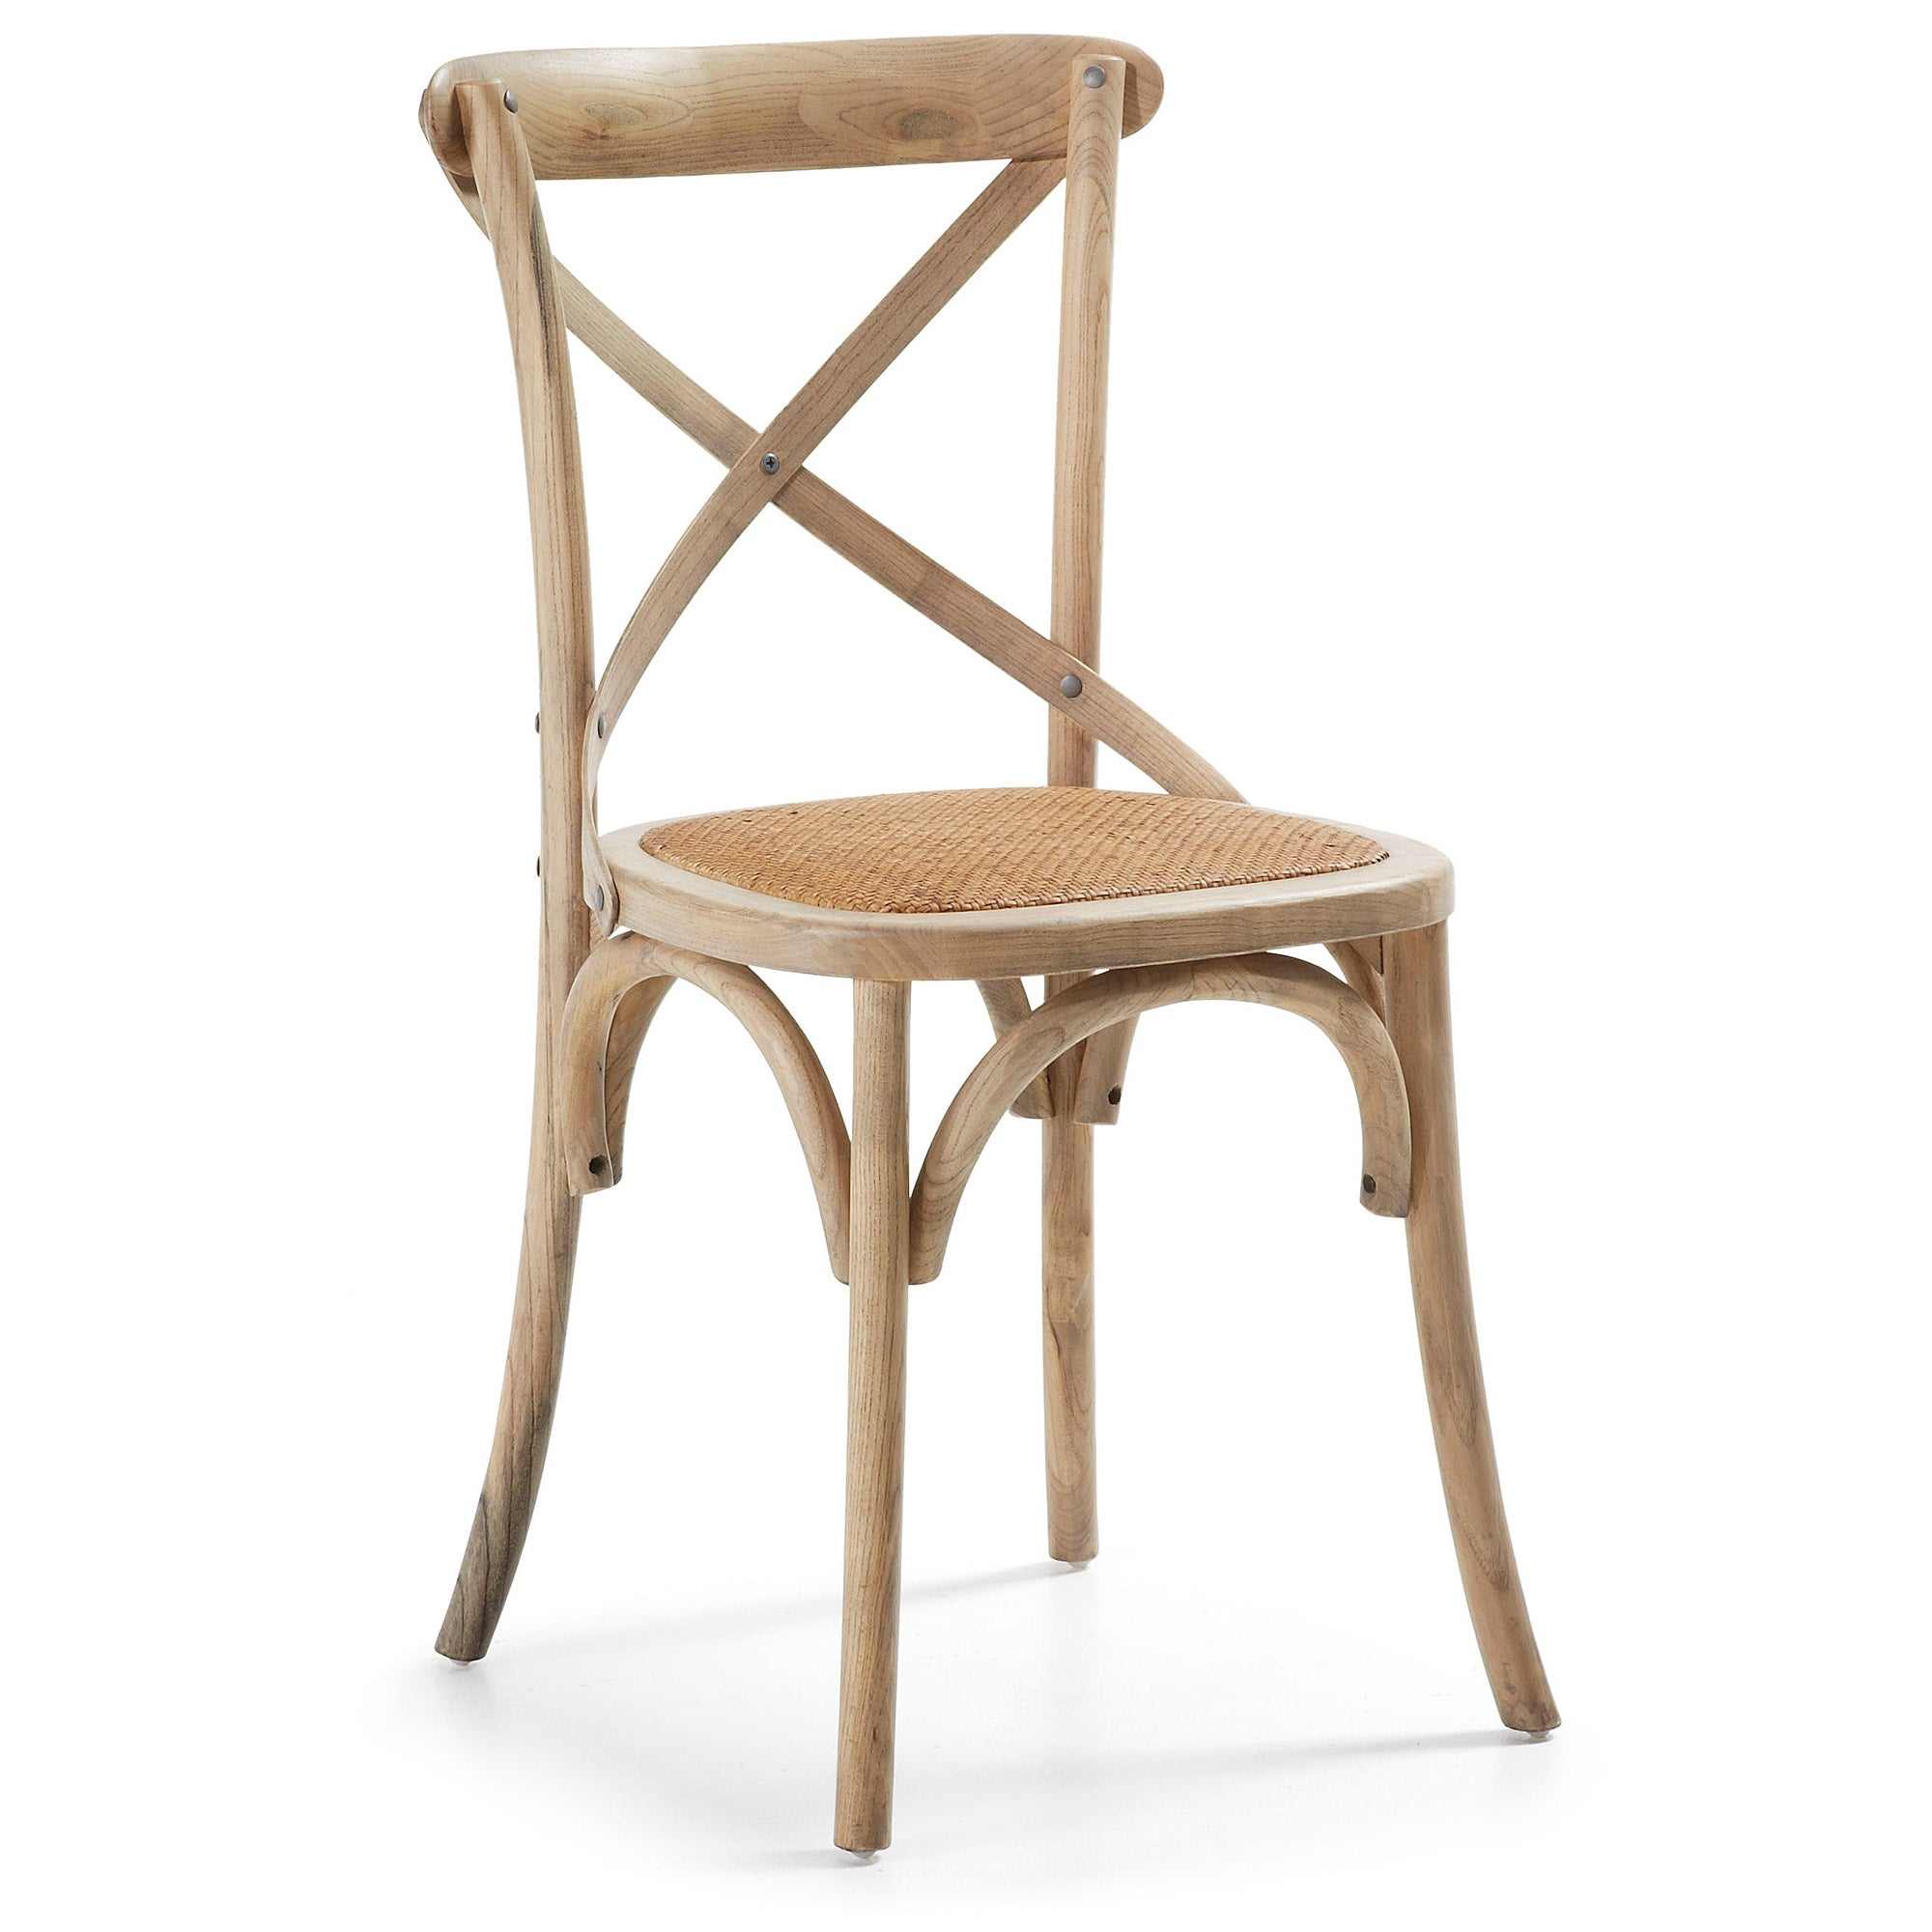 Alsie chair in solid birch wood with natural lacquer